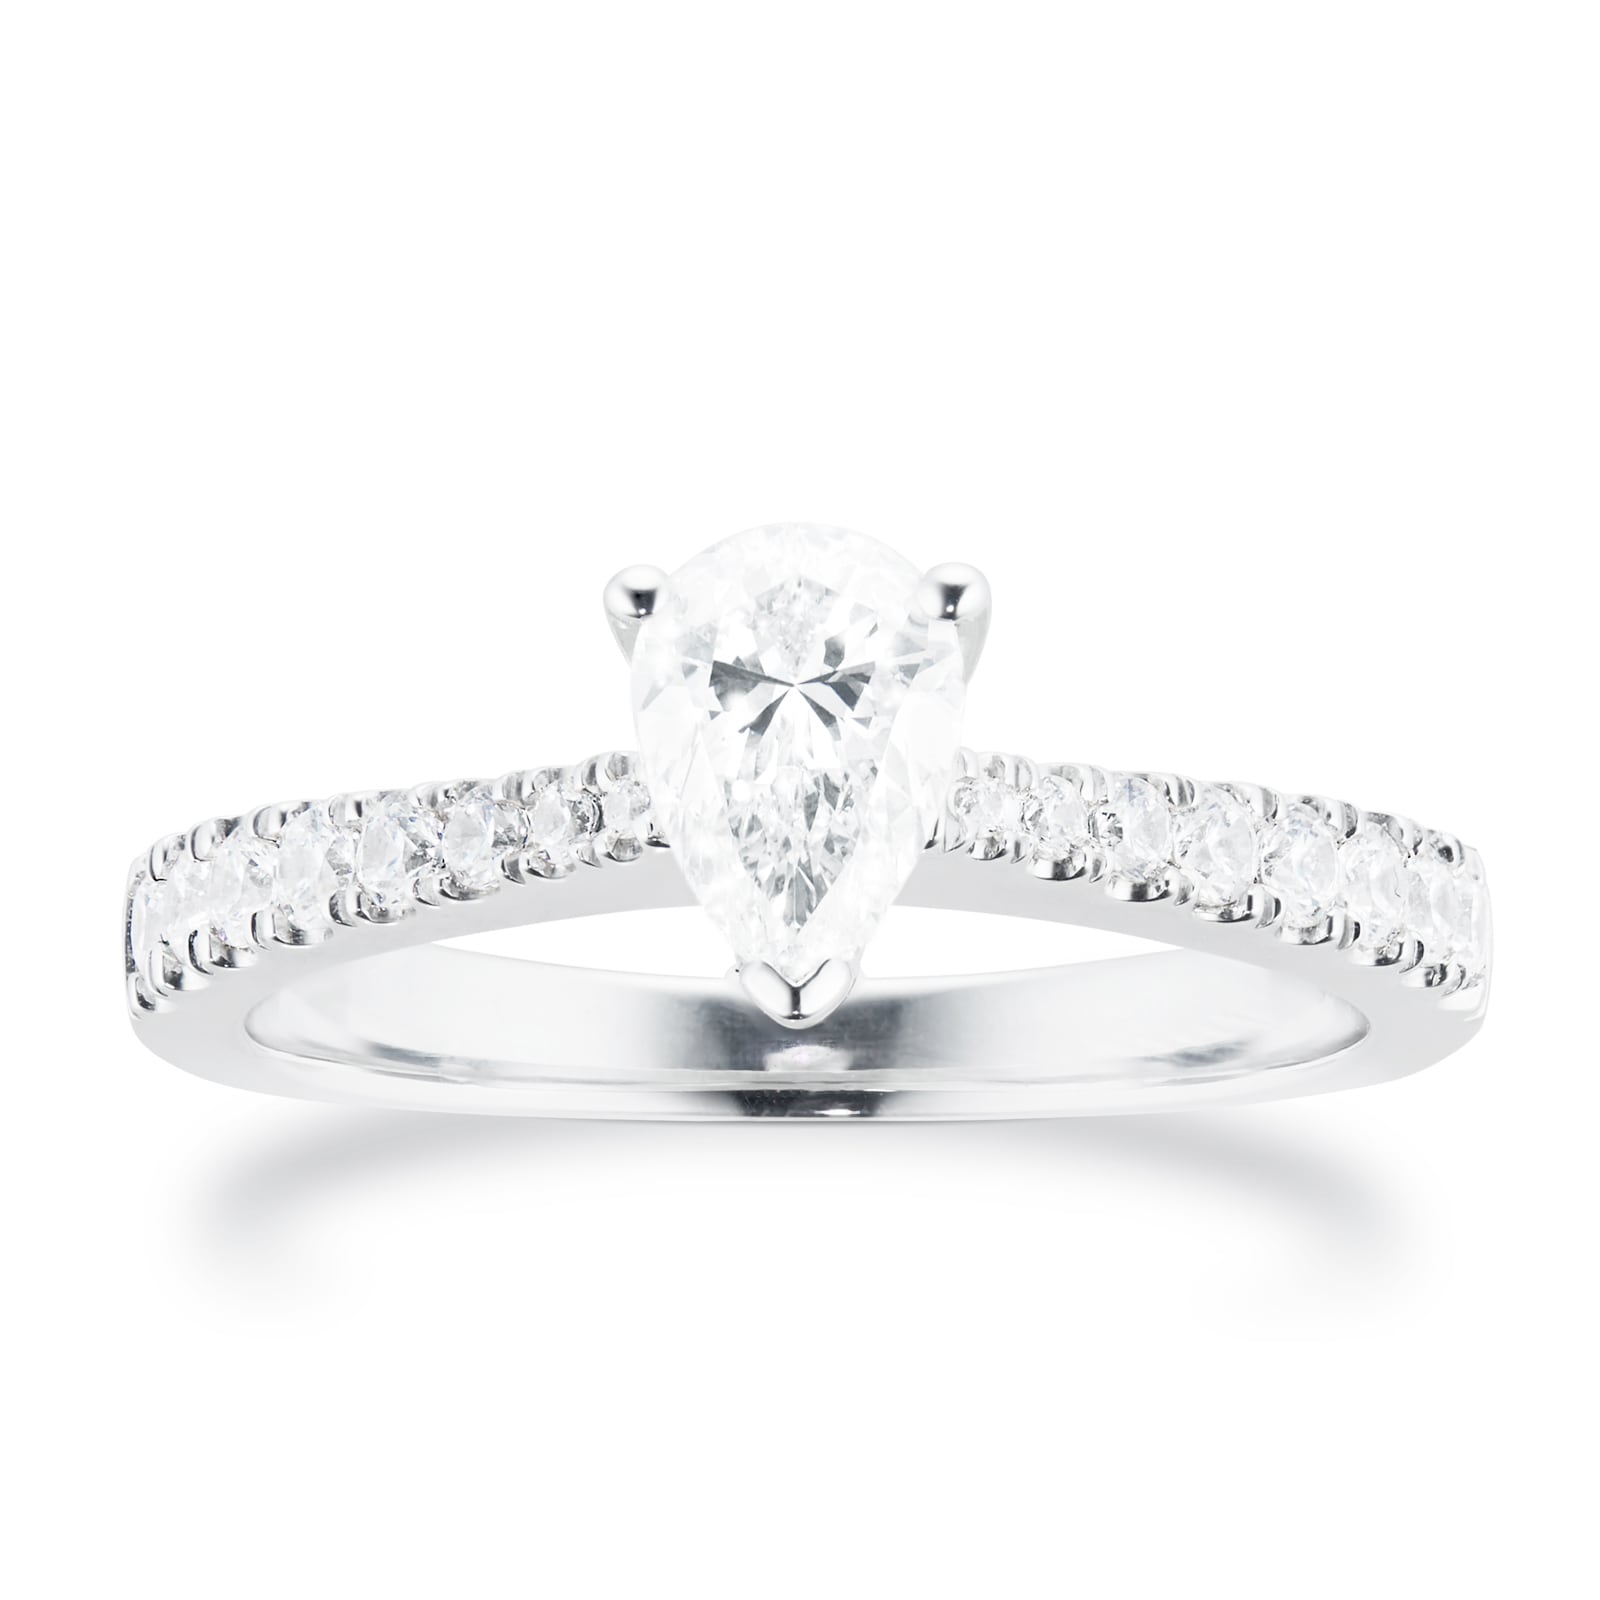 Platinum 0.70cttw Goldsmiths Brightest Diamond Pear Cut Solitaire Engagement Ring - Ring Size N